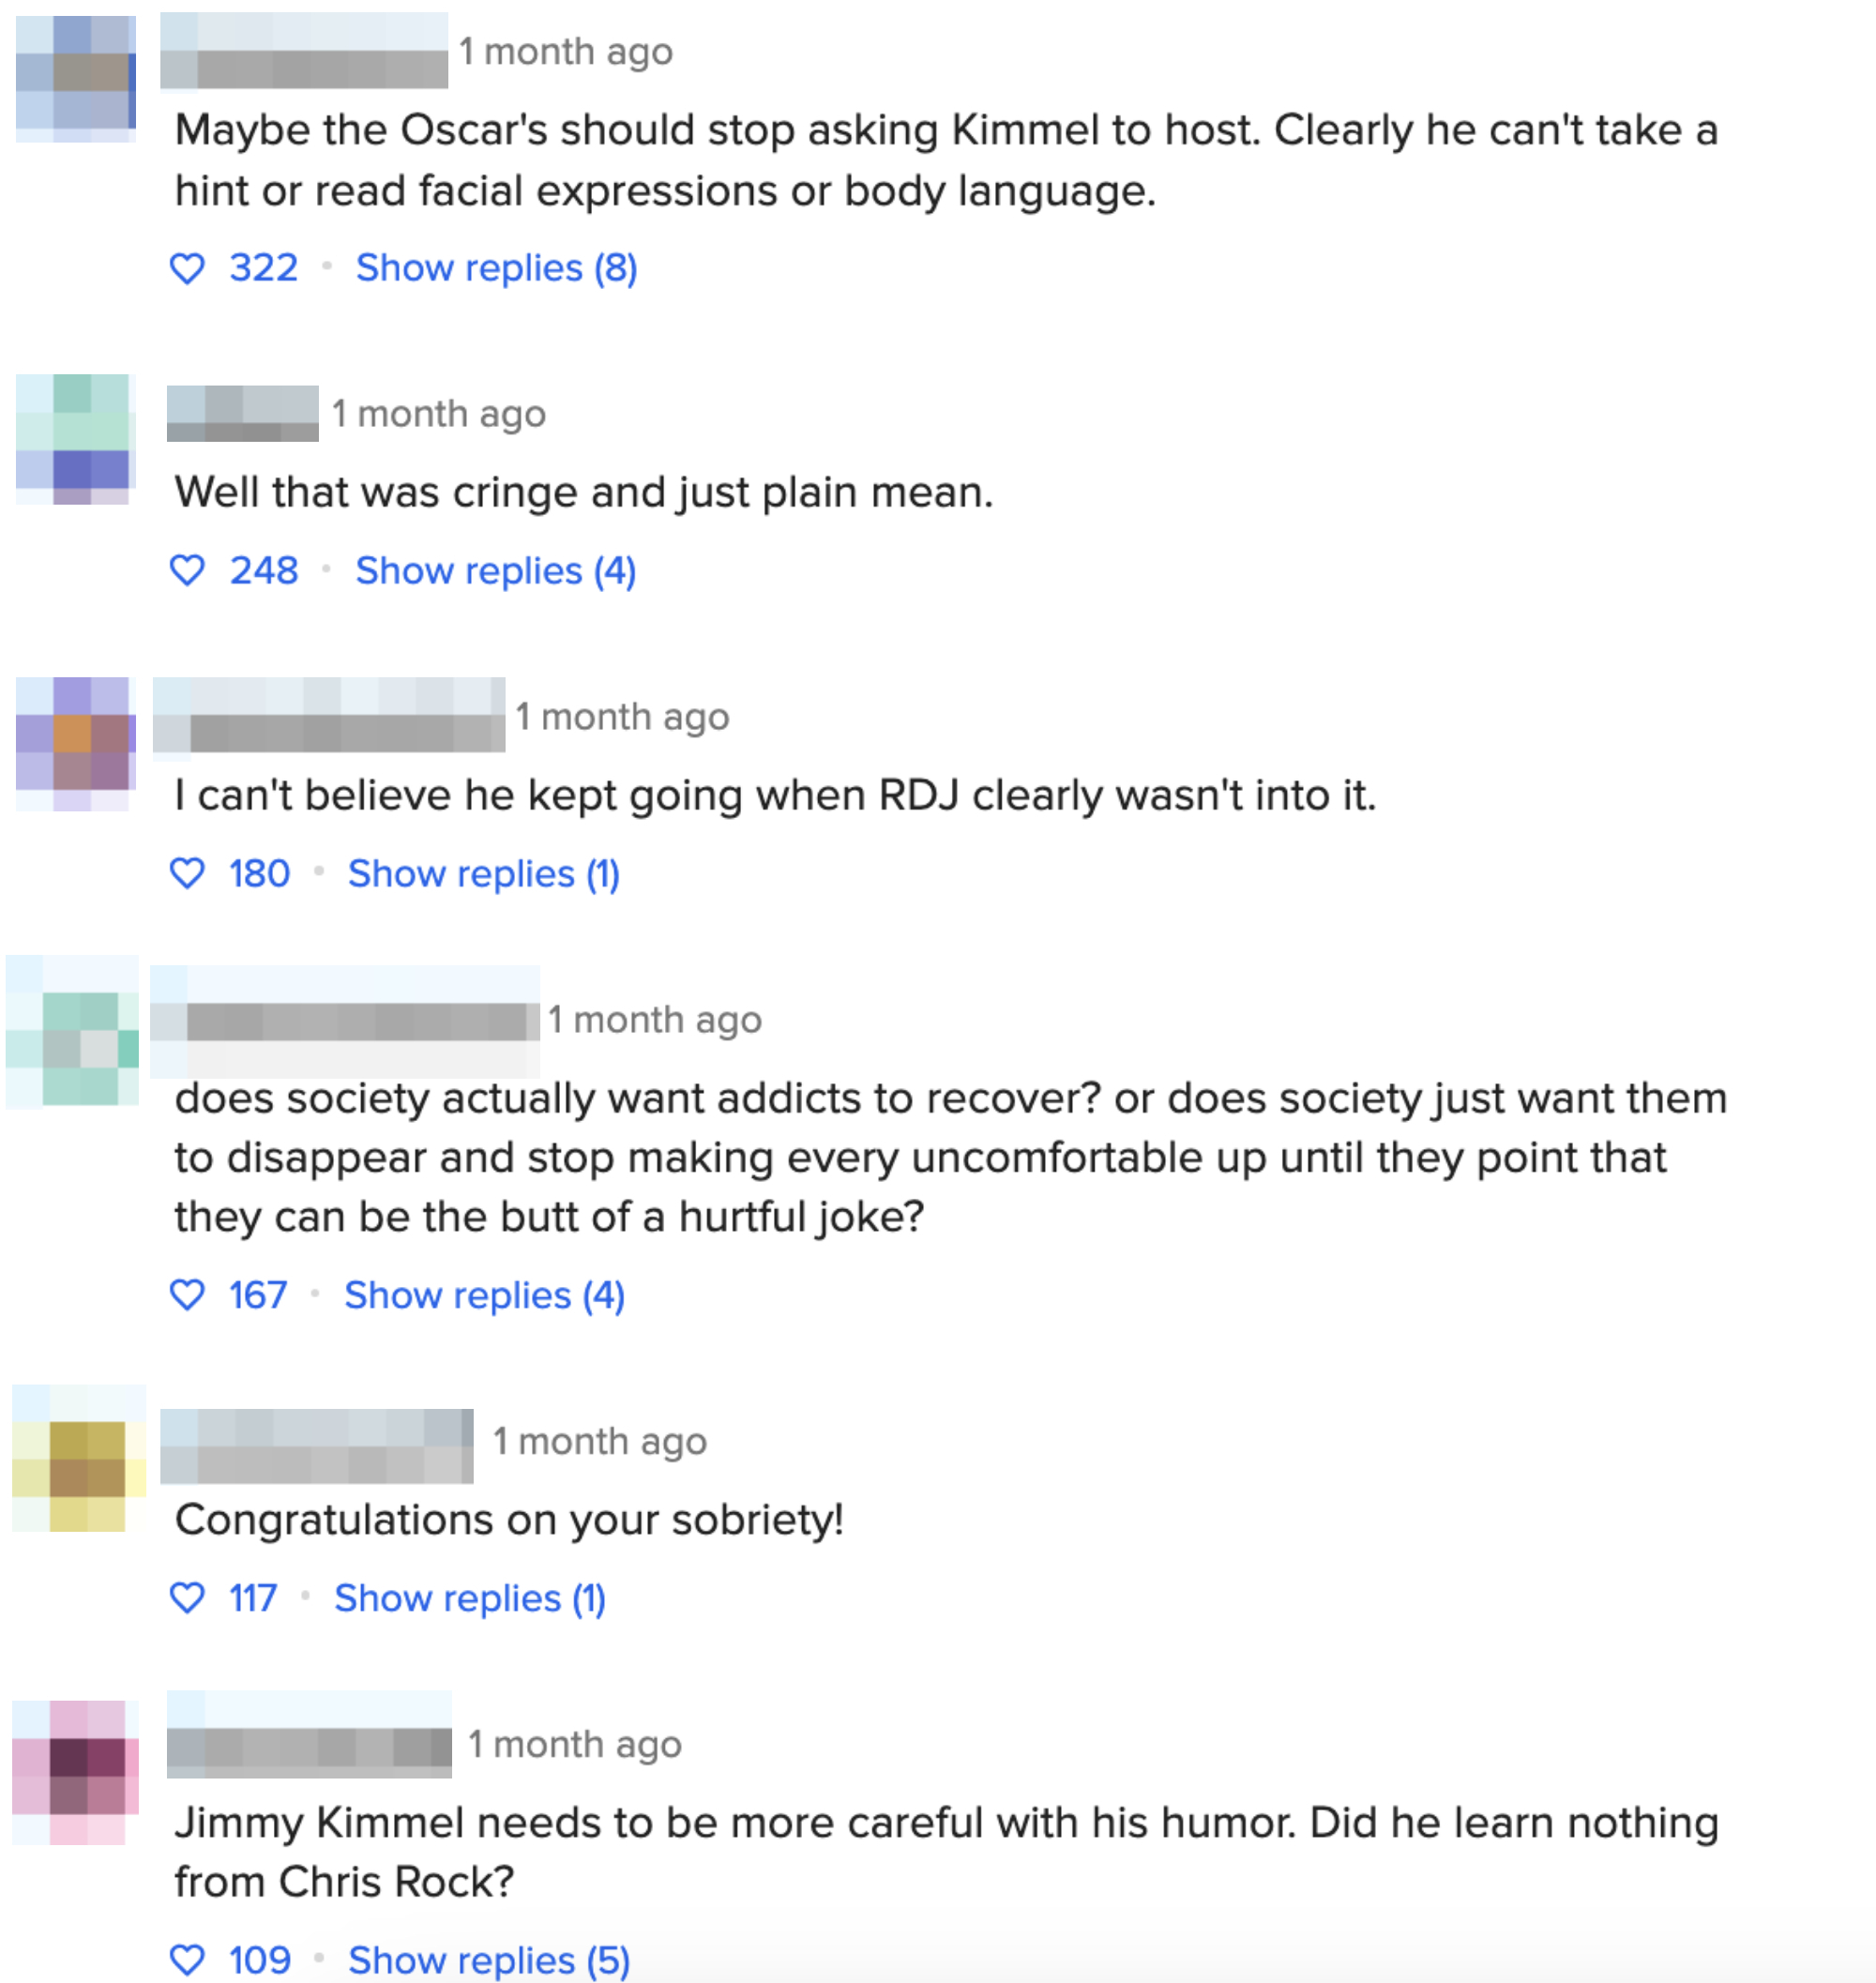 Commenters react to a comedian&#x27;s remark, some finding it inappropriate while others defend the humor